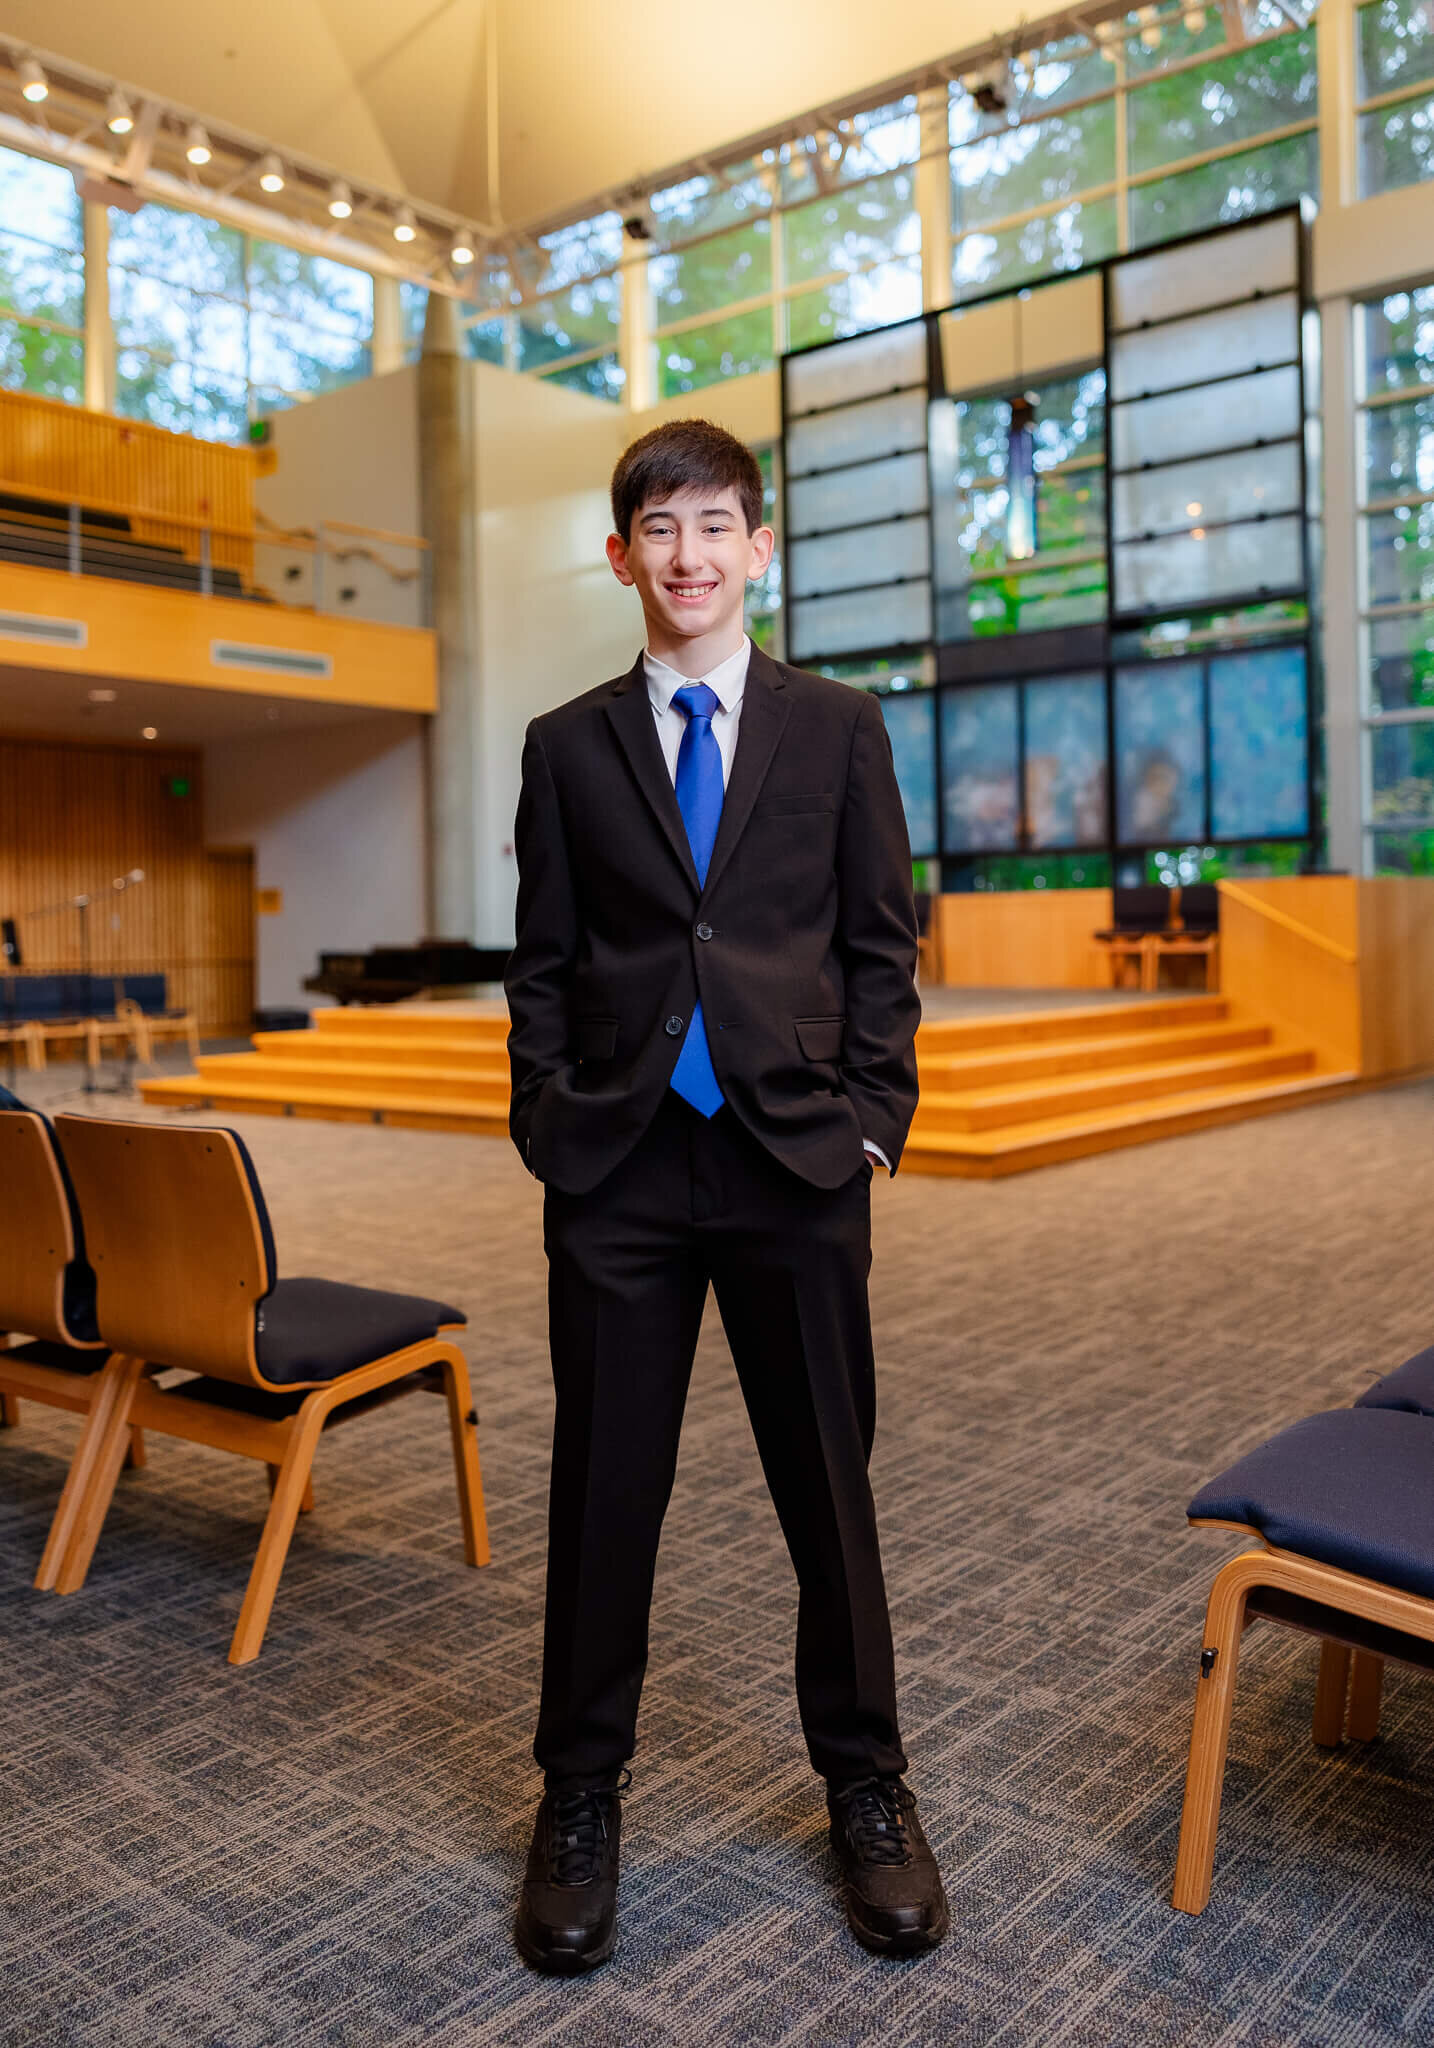 A teen boy in a black suit and blue tie stands in the temple with hands in pockets during a Bellevue Bar and Bat Mitzvah Photography session